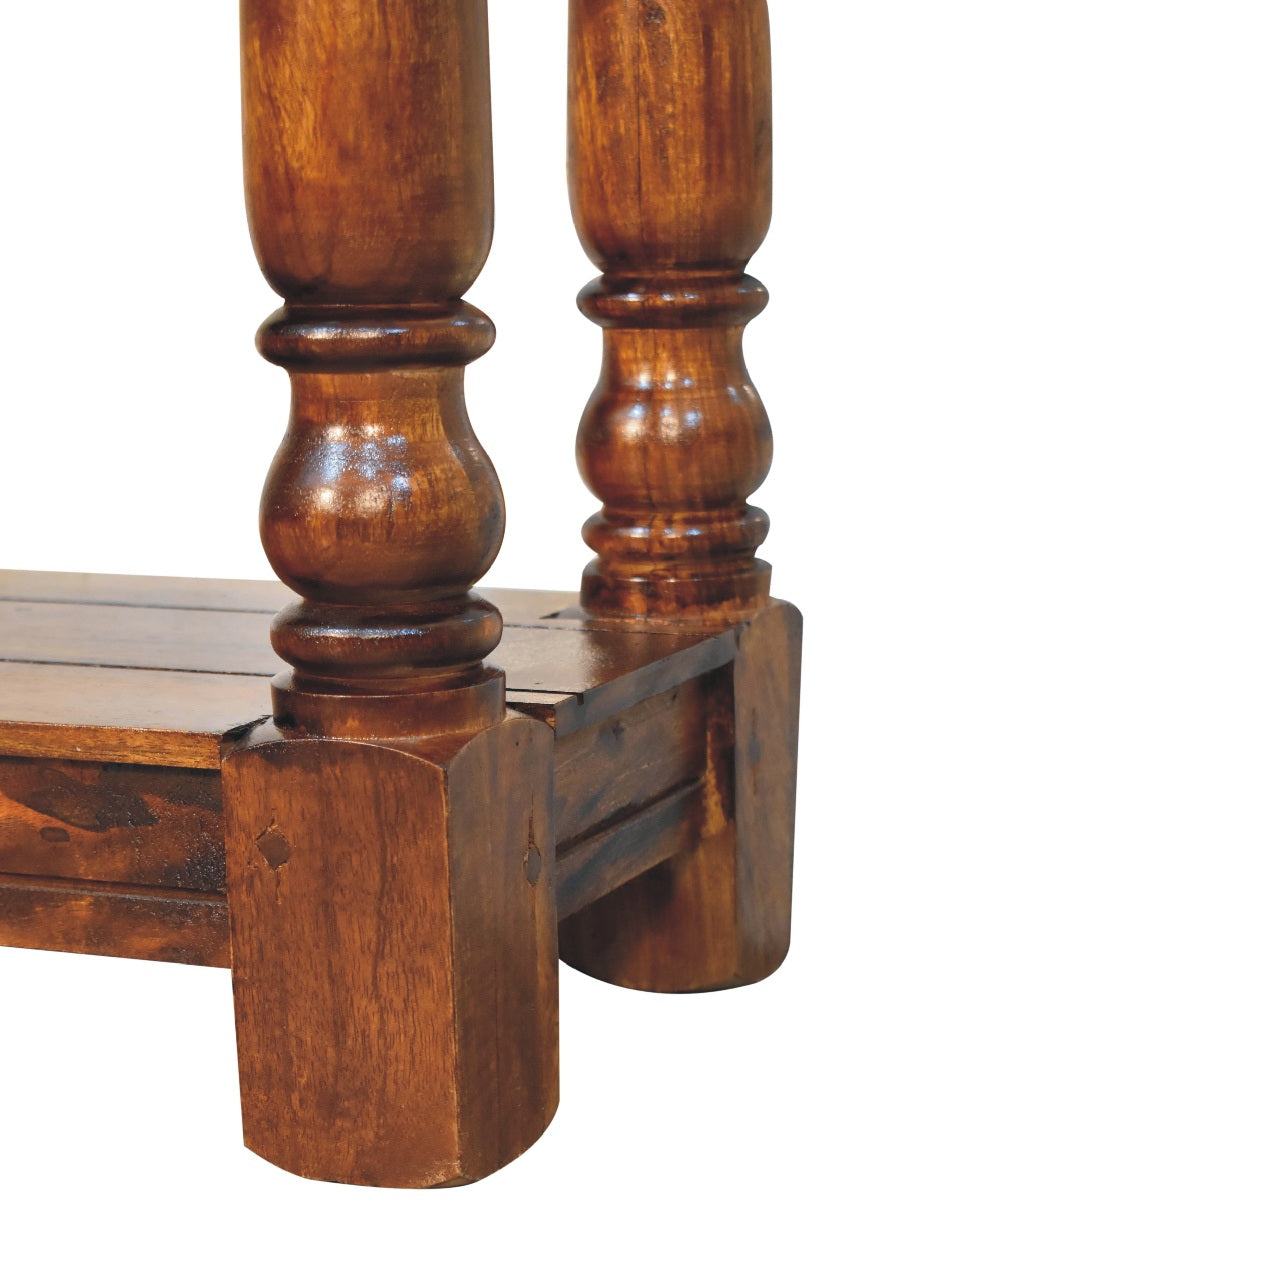 Chestnut 4 Drawer Console Table - Red Ross Retail-Furniture Specialists 